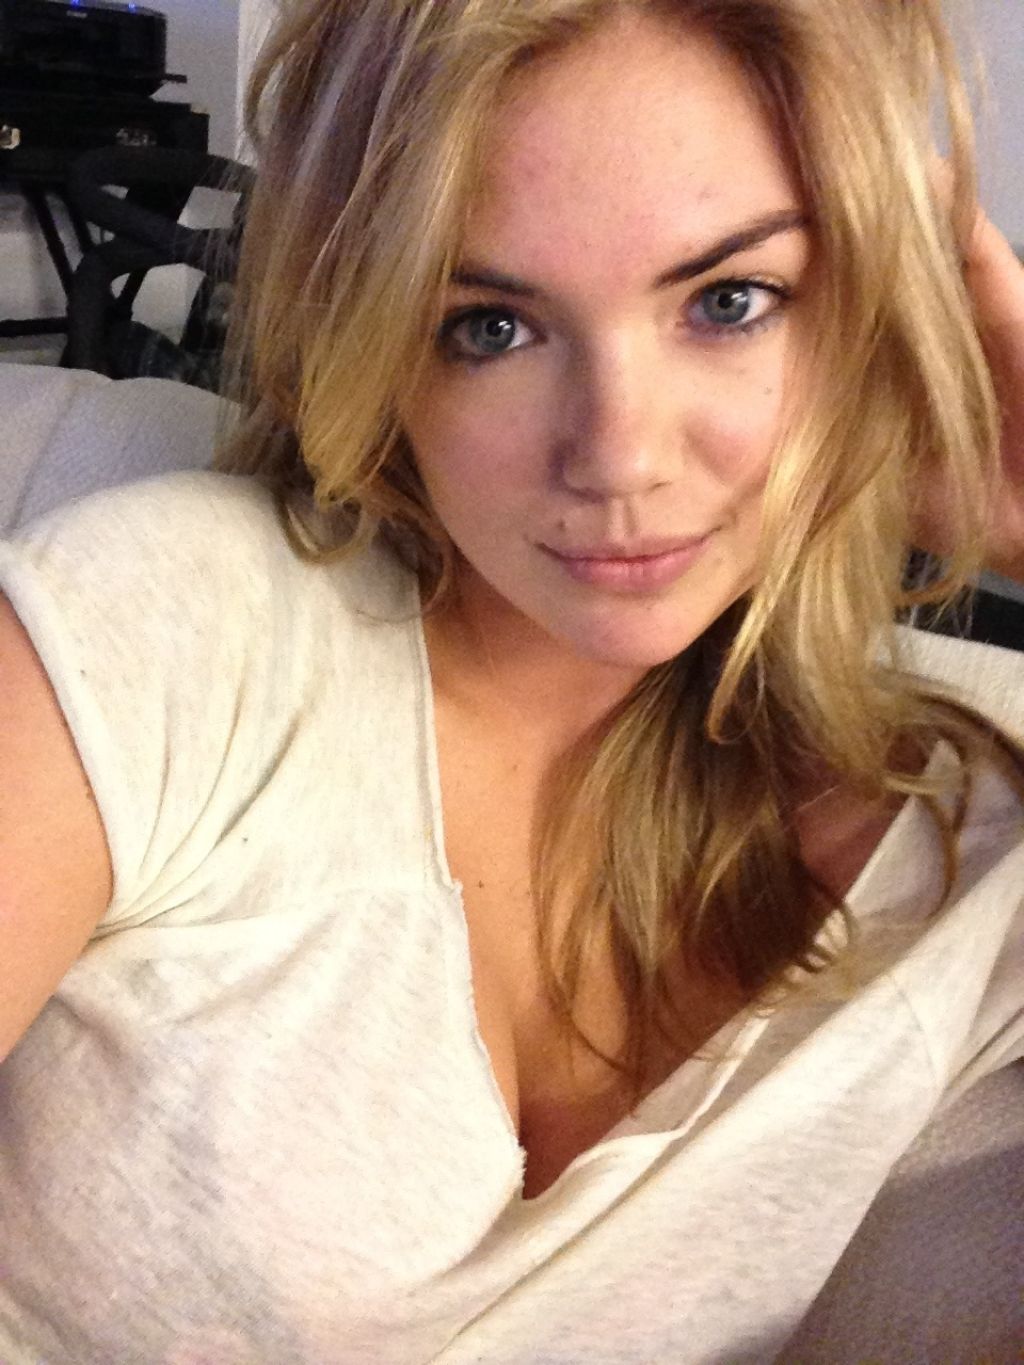 Very sexy candid Kate Upton selfie photo